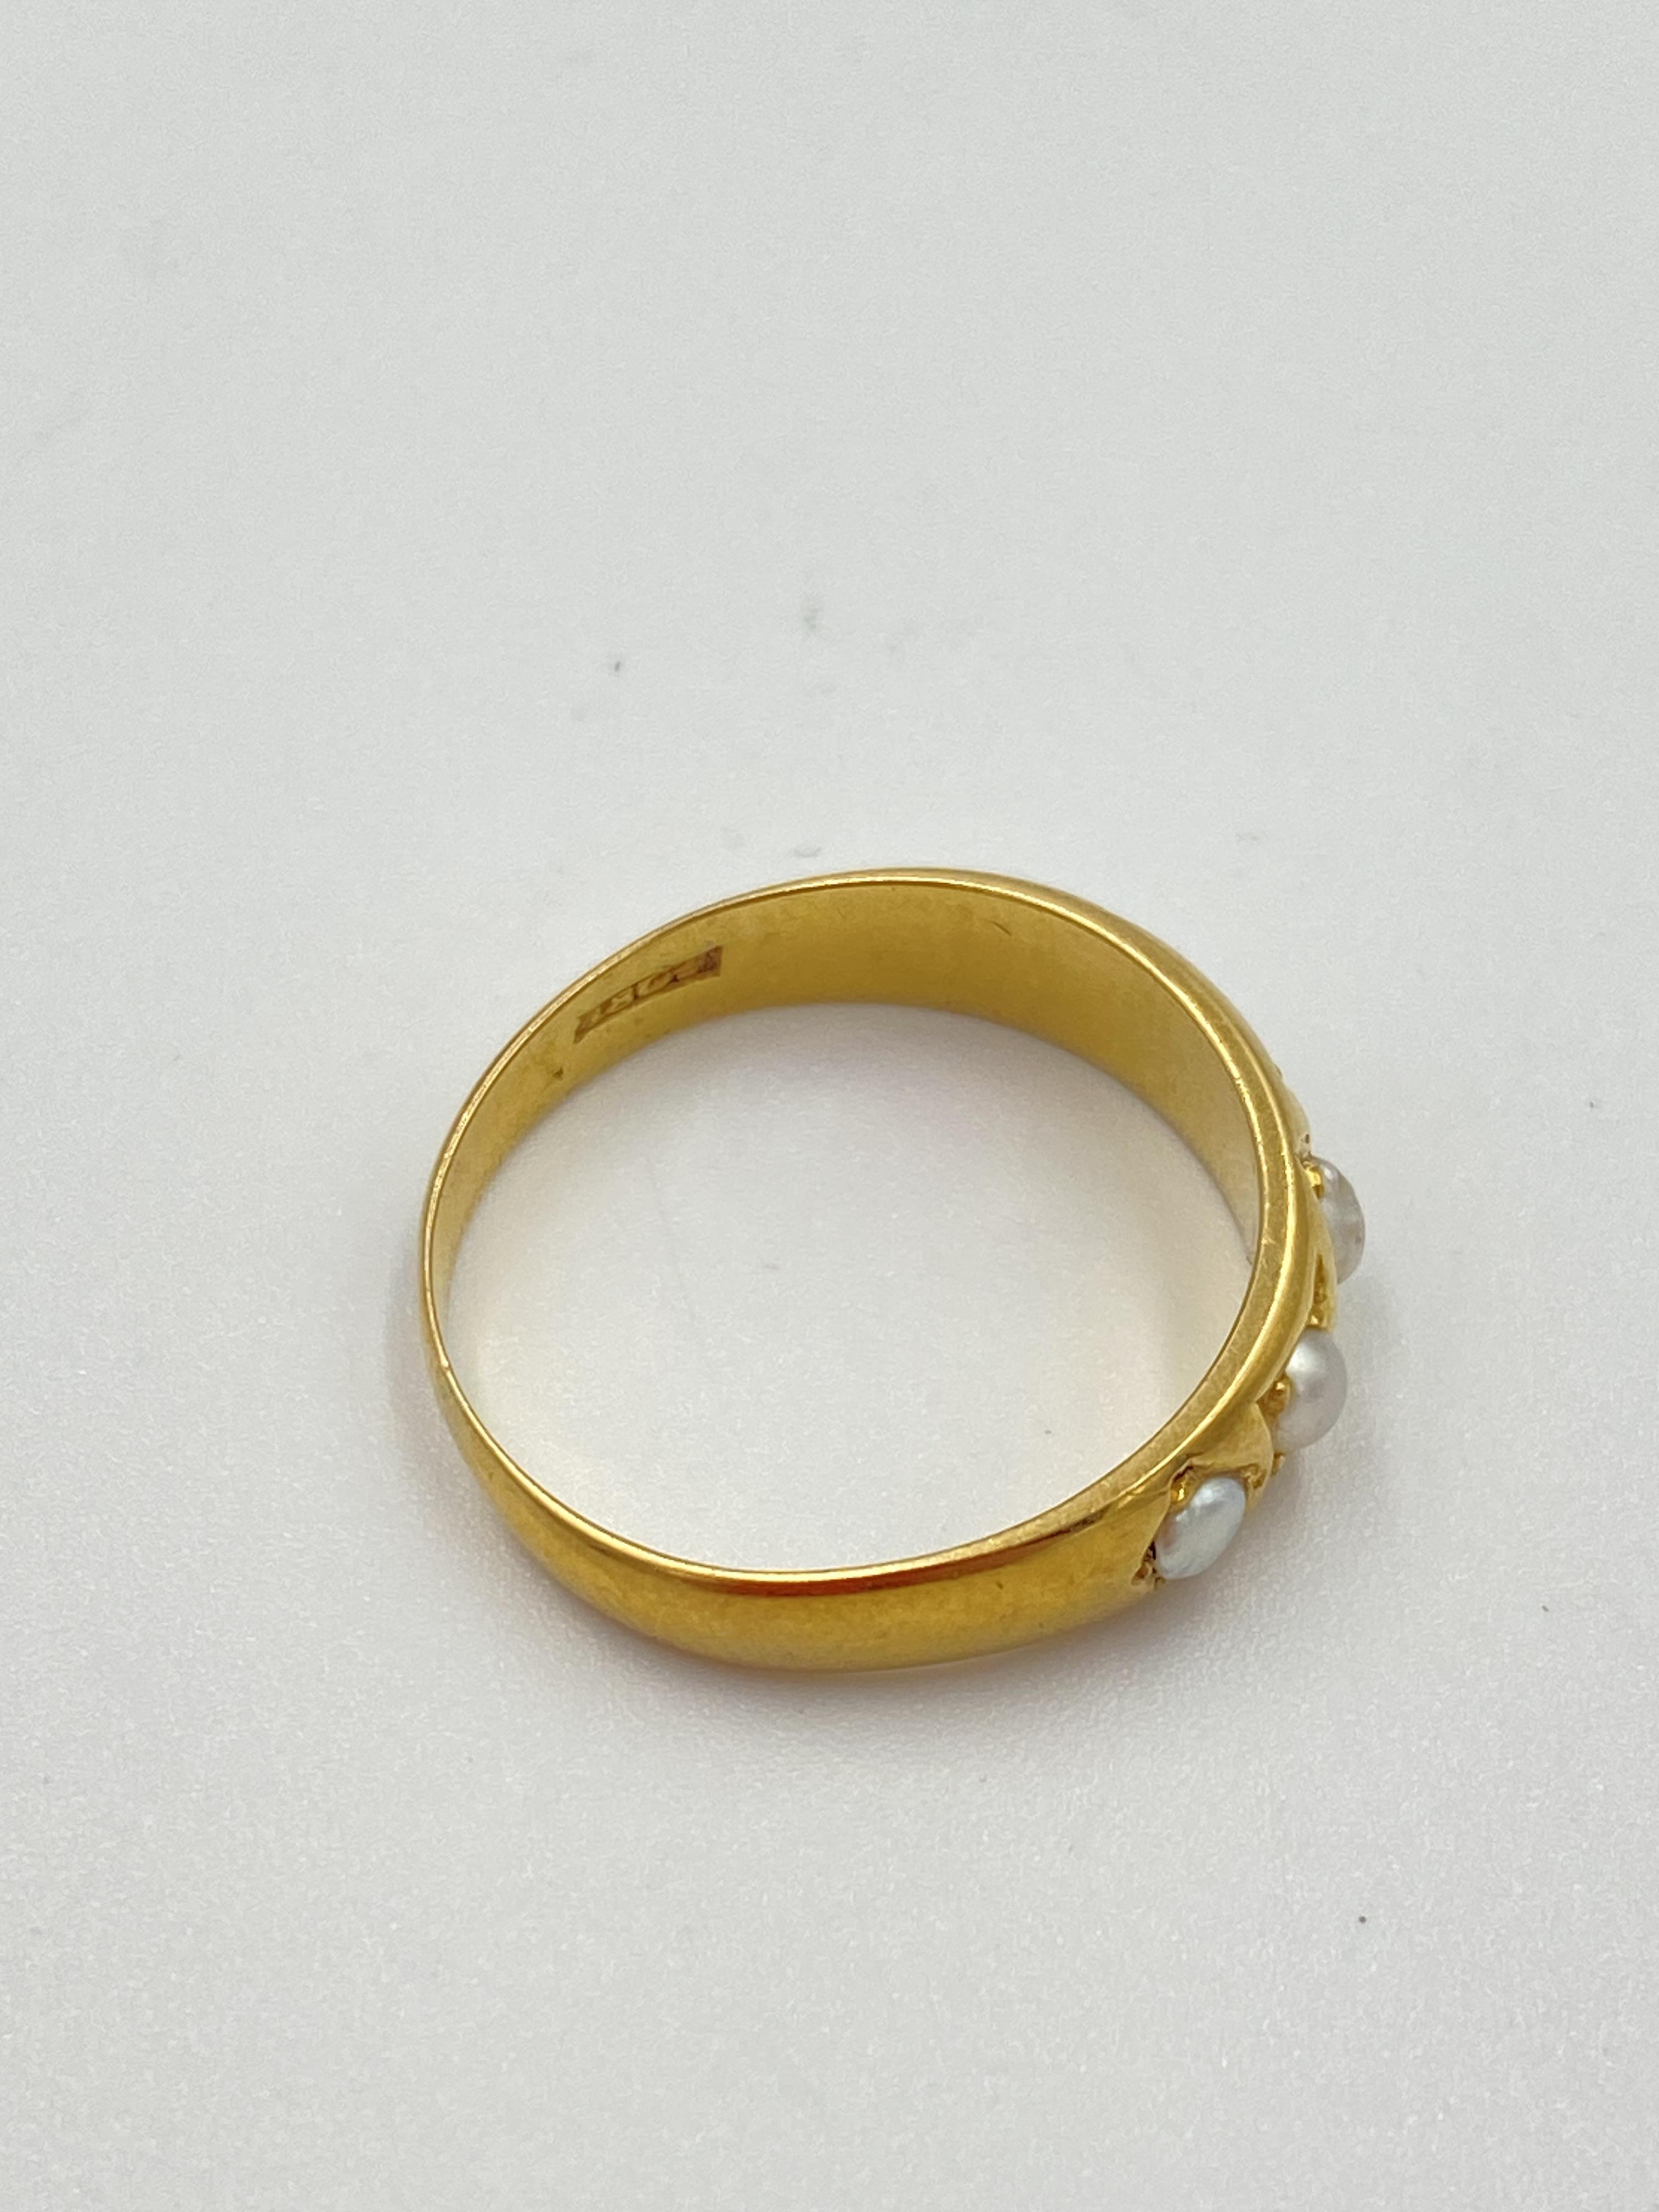 18ct gold and seed pearl ring - Image 3 of 4